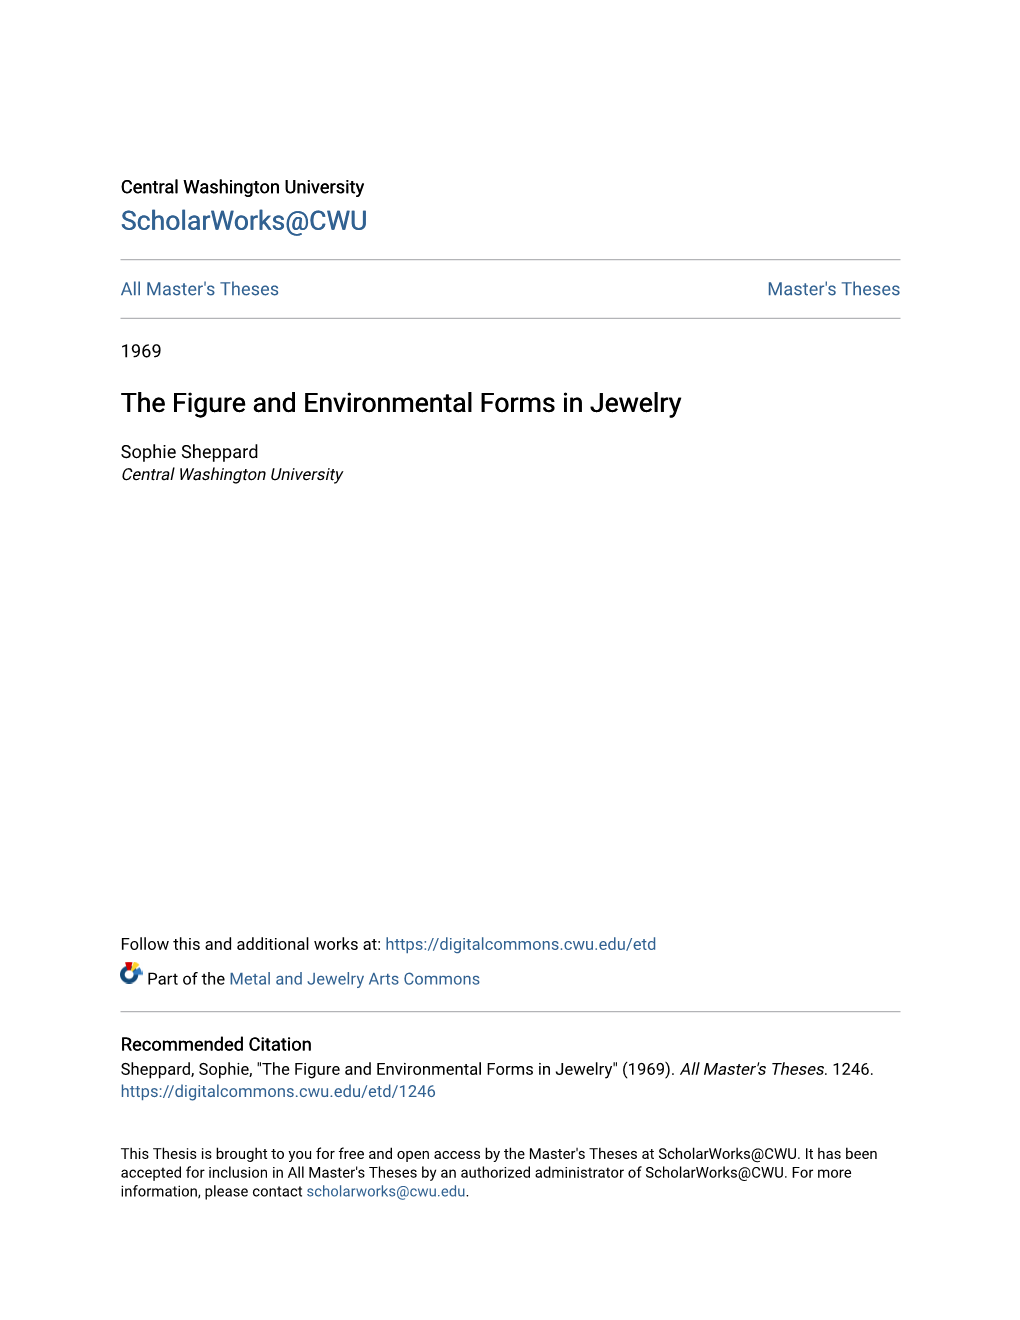 The Figure and Environmental Forms in Jewelry